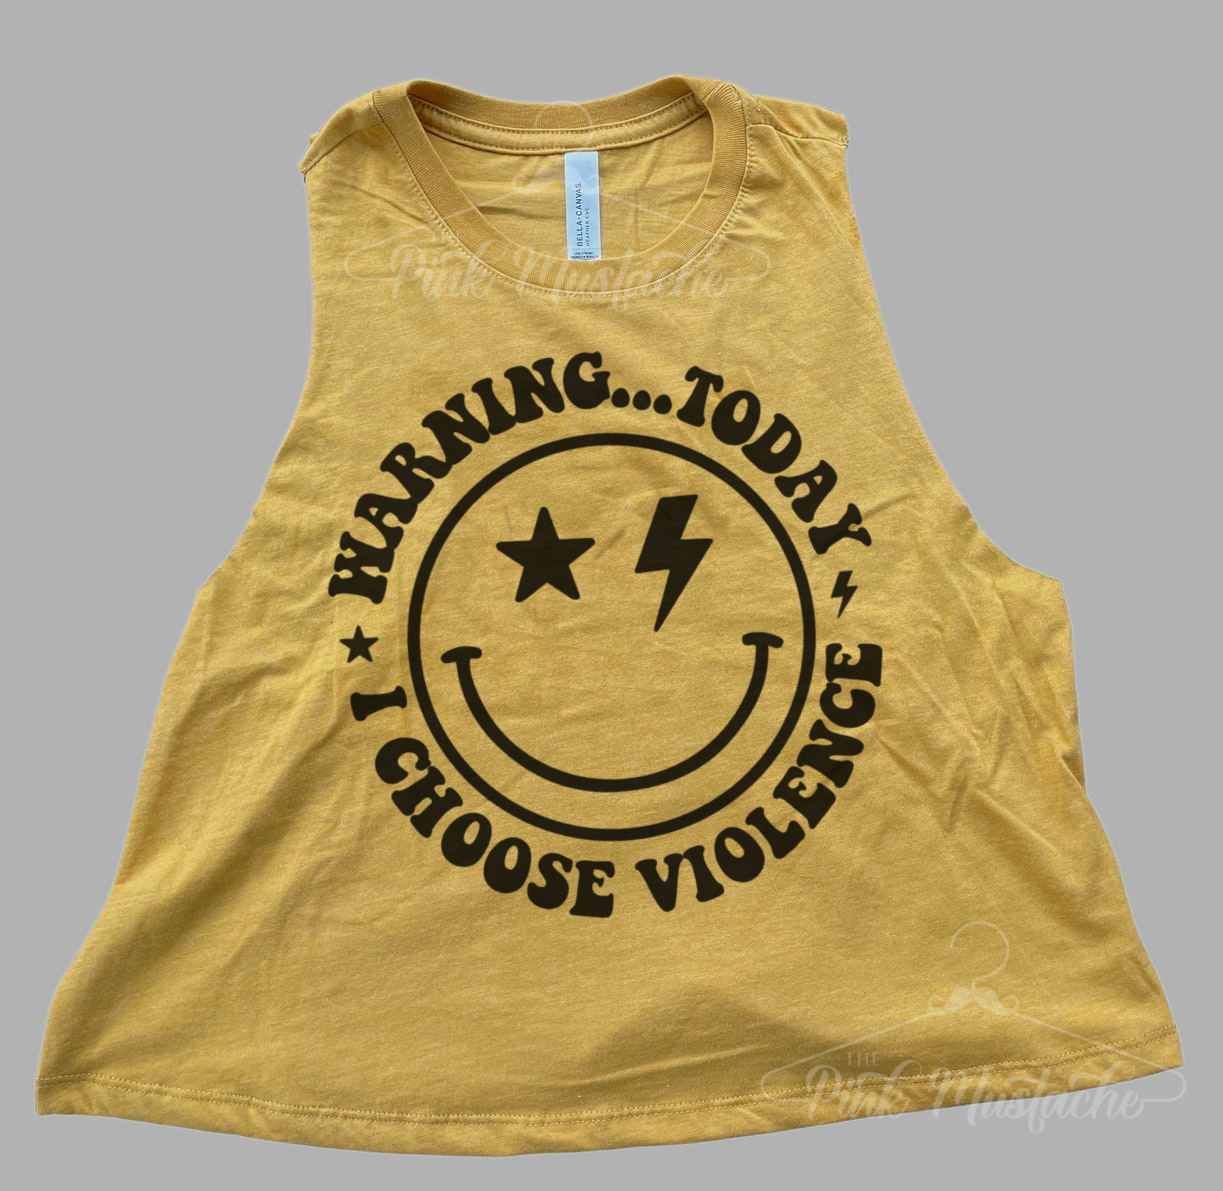 Warning: Today I Choose Violence Funny Cropped Tank/ Gifts for Her/ Funny Tank Top/ Adult Sizes Available